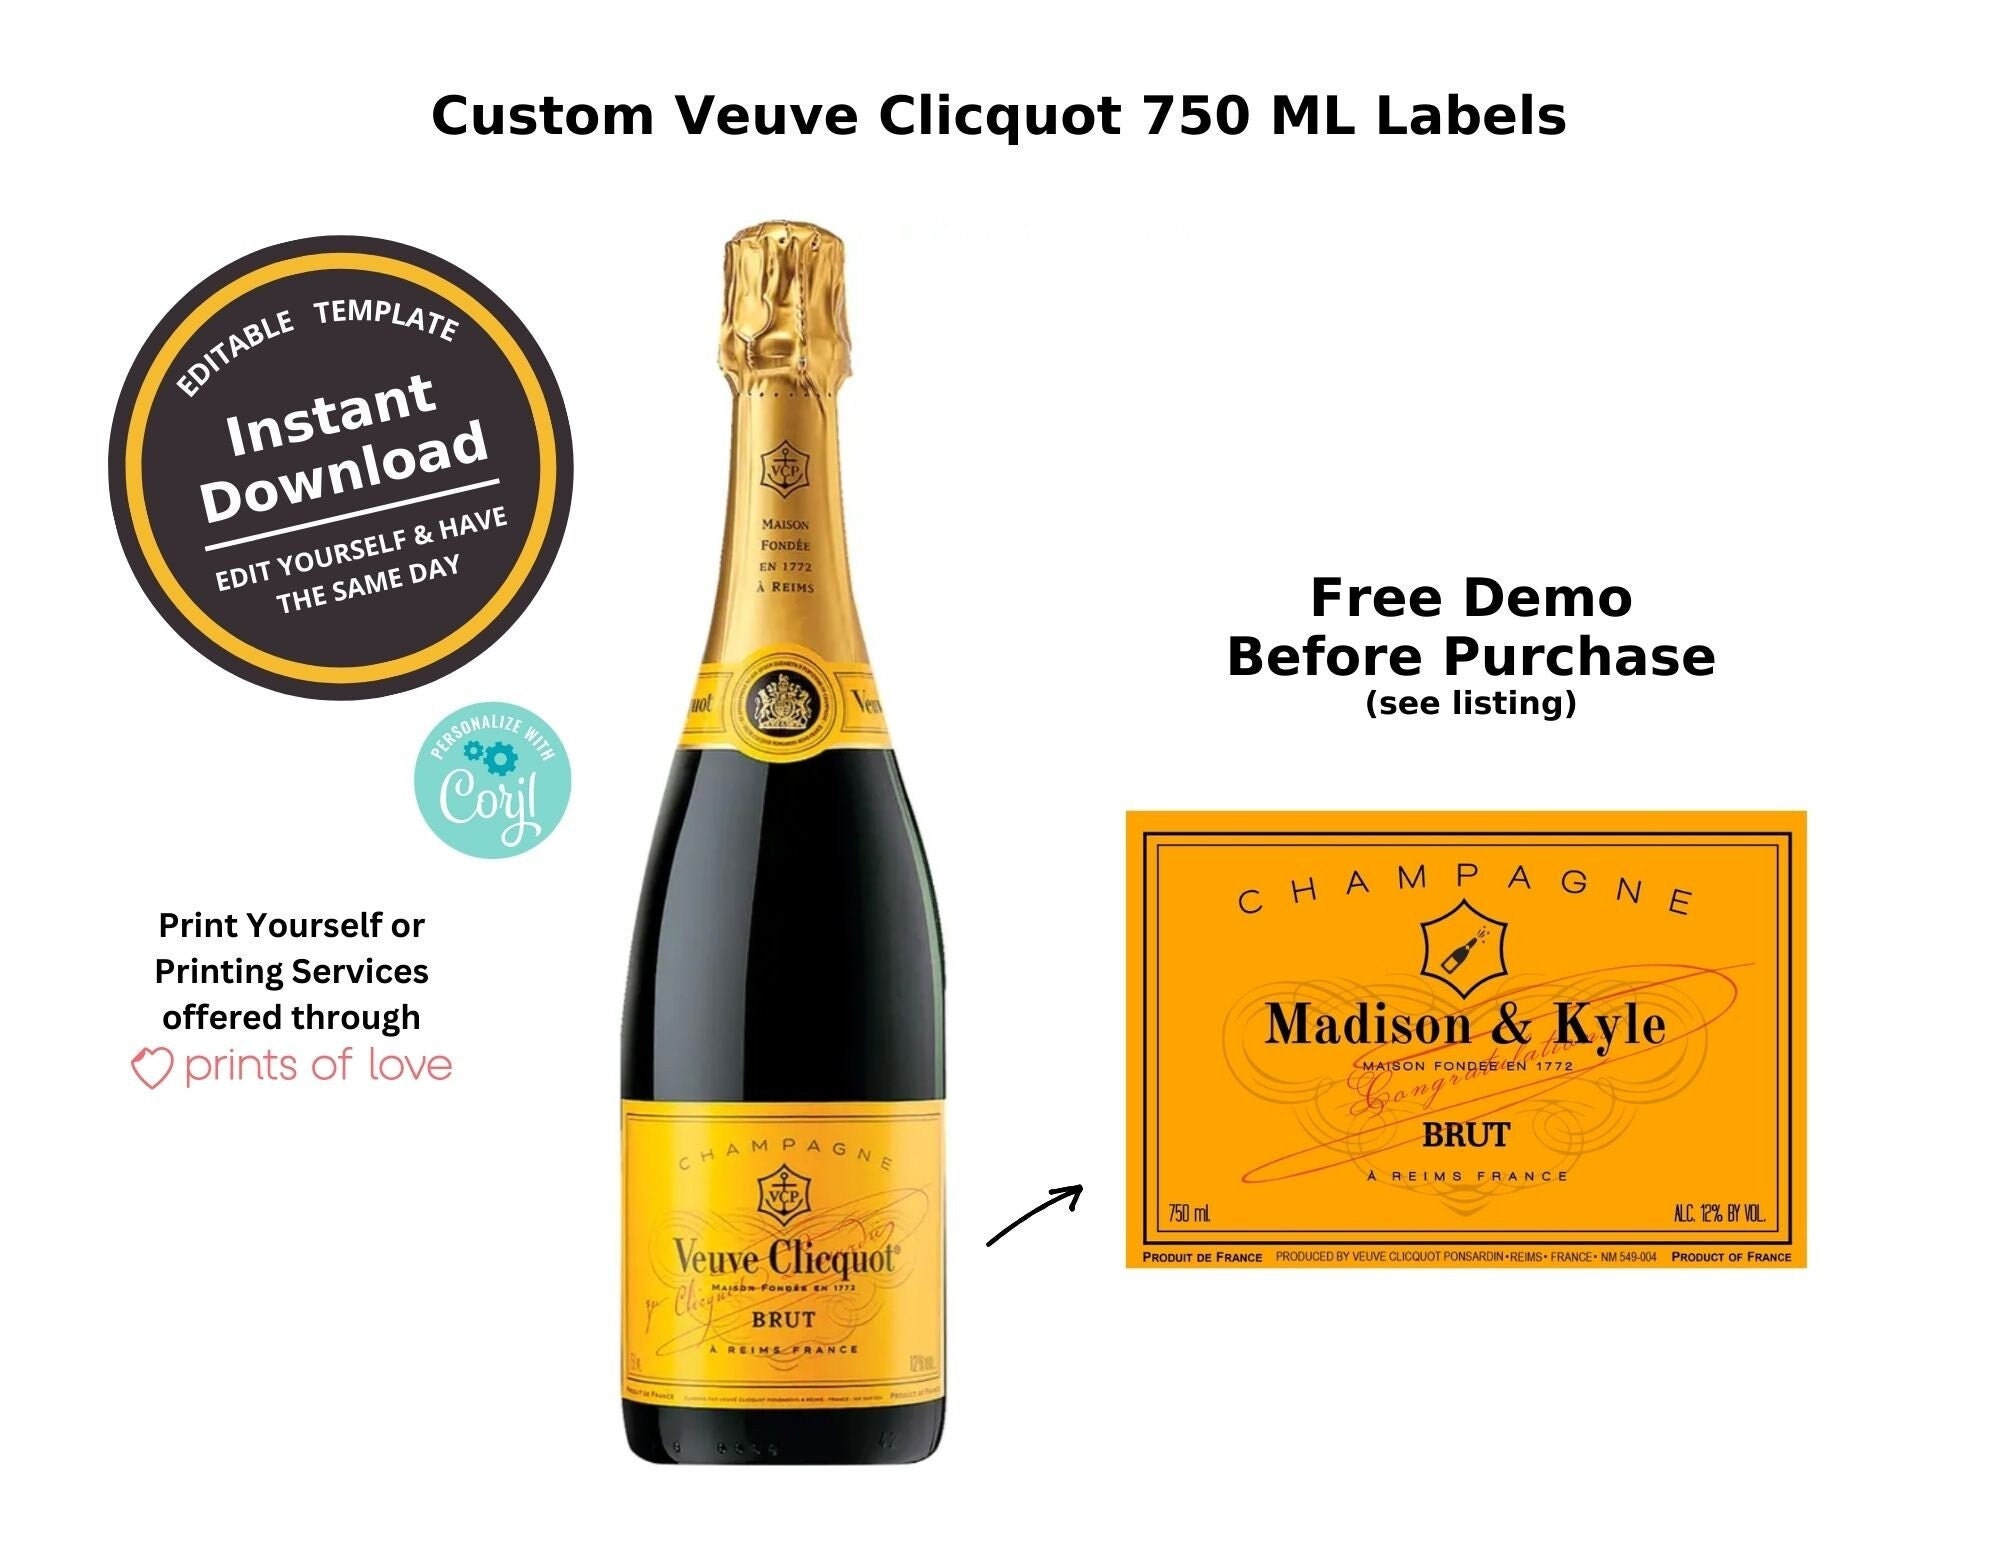 Veuve Clicquot Custom 750ml Champagne Bottle Label Template Printable |  Customize for Any Occasion | Instant Download